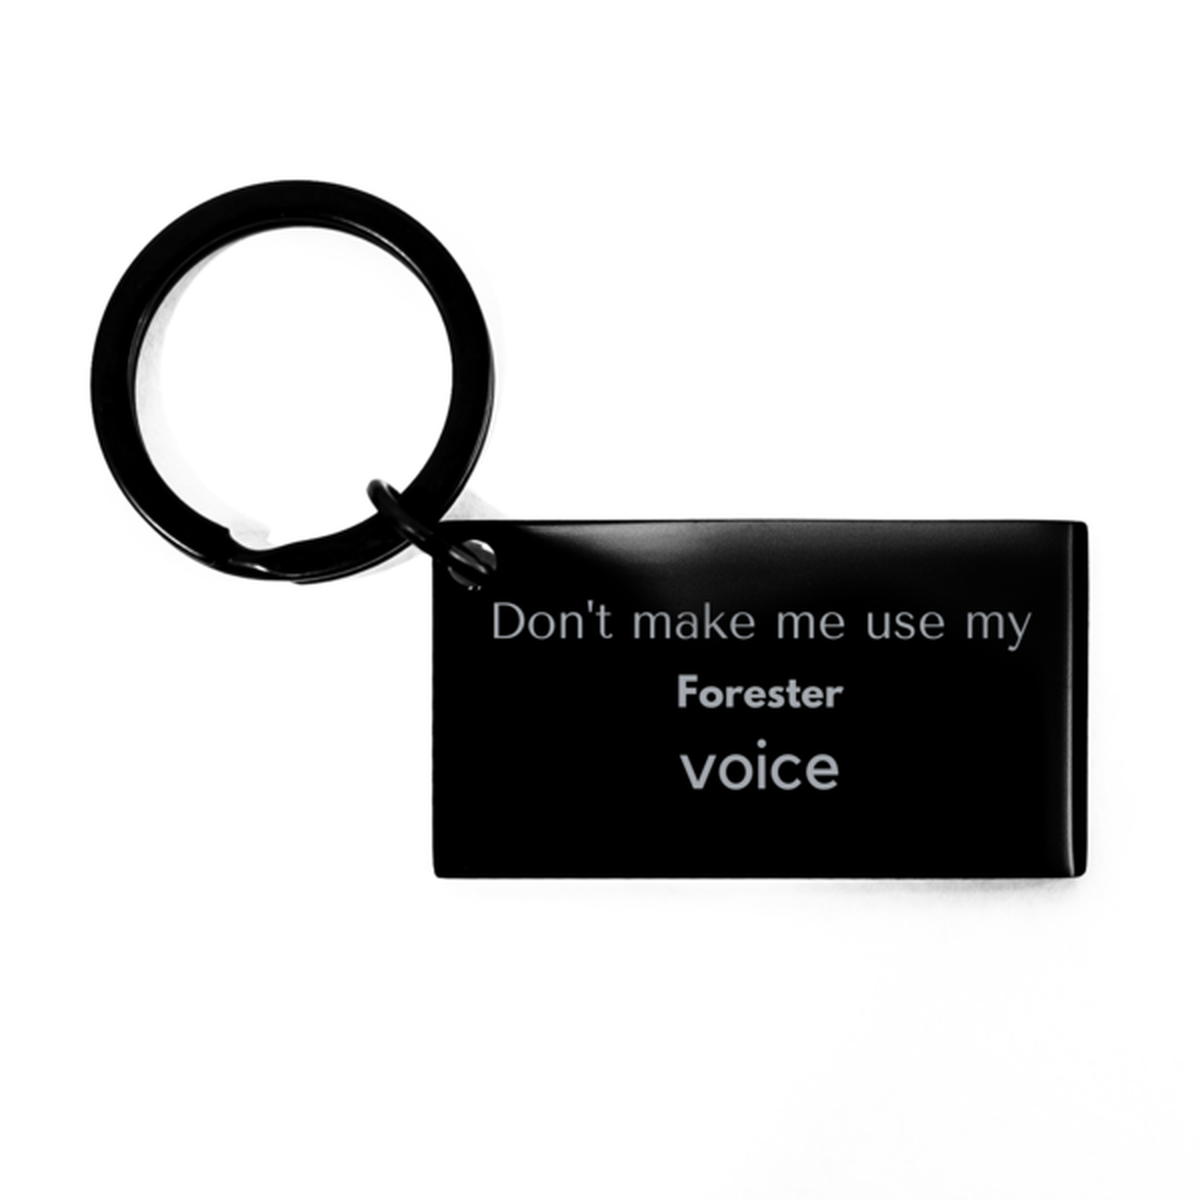 Don't make me use my Forester voice, Sarcasm Forester Gifts, Christmas Forester Keychain Birthday Unique Gifts For Forester Coworkers, Men, Women, Colleague, Friends